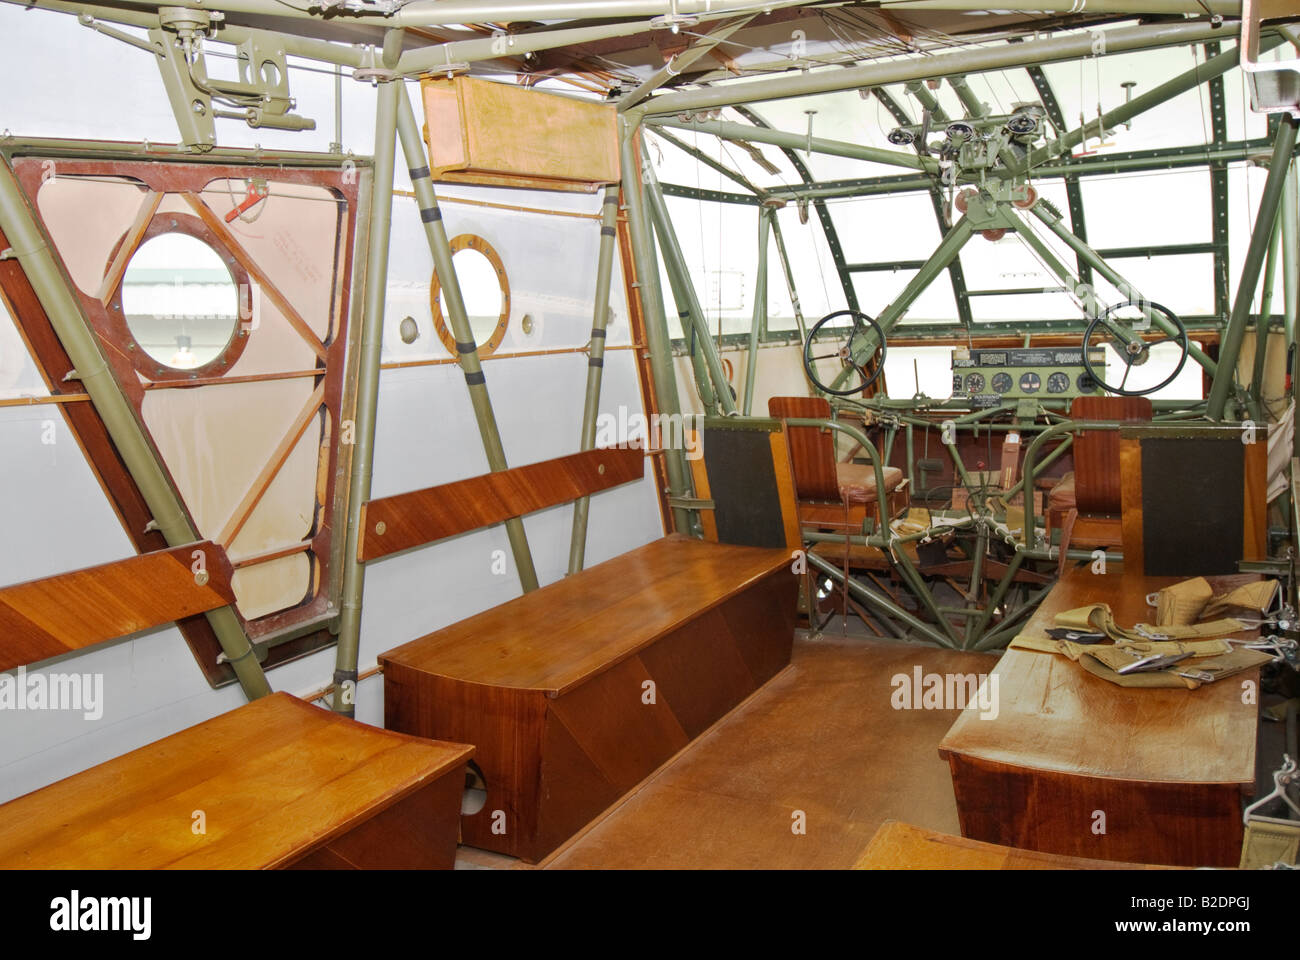 Texas Lubbock Silent Wings Museum dedicated to World War II glider operations CG 4A glider interior Stock Photo